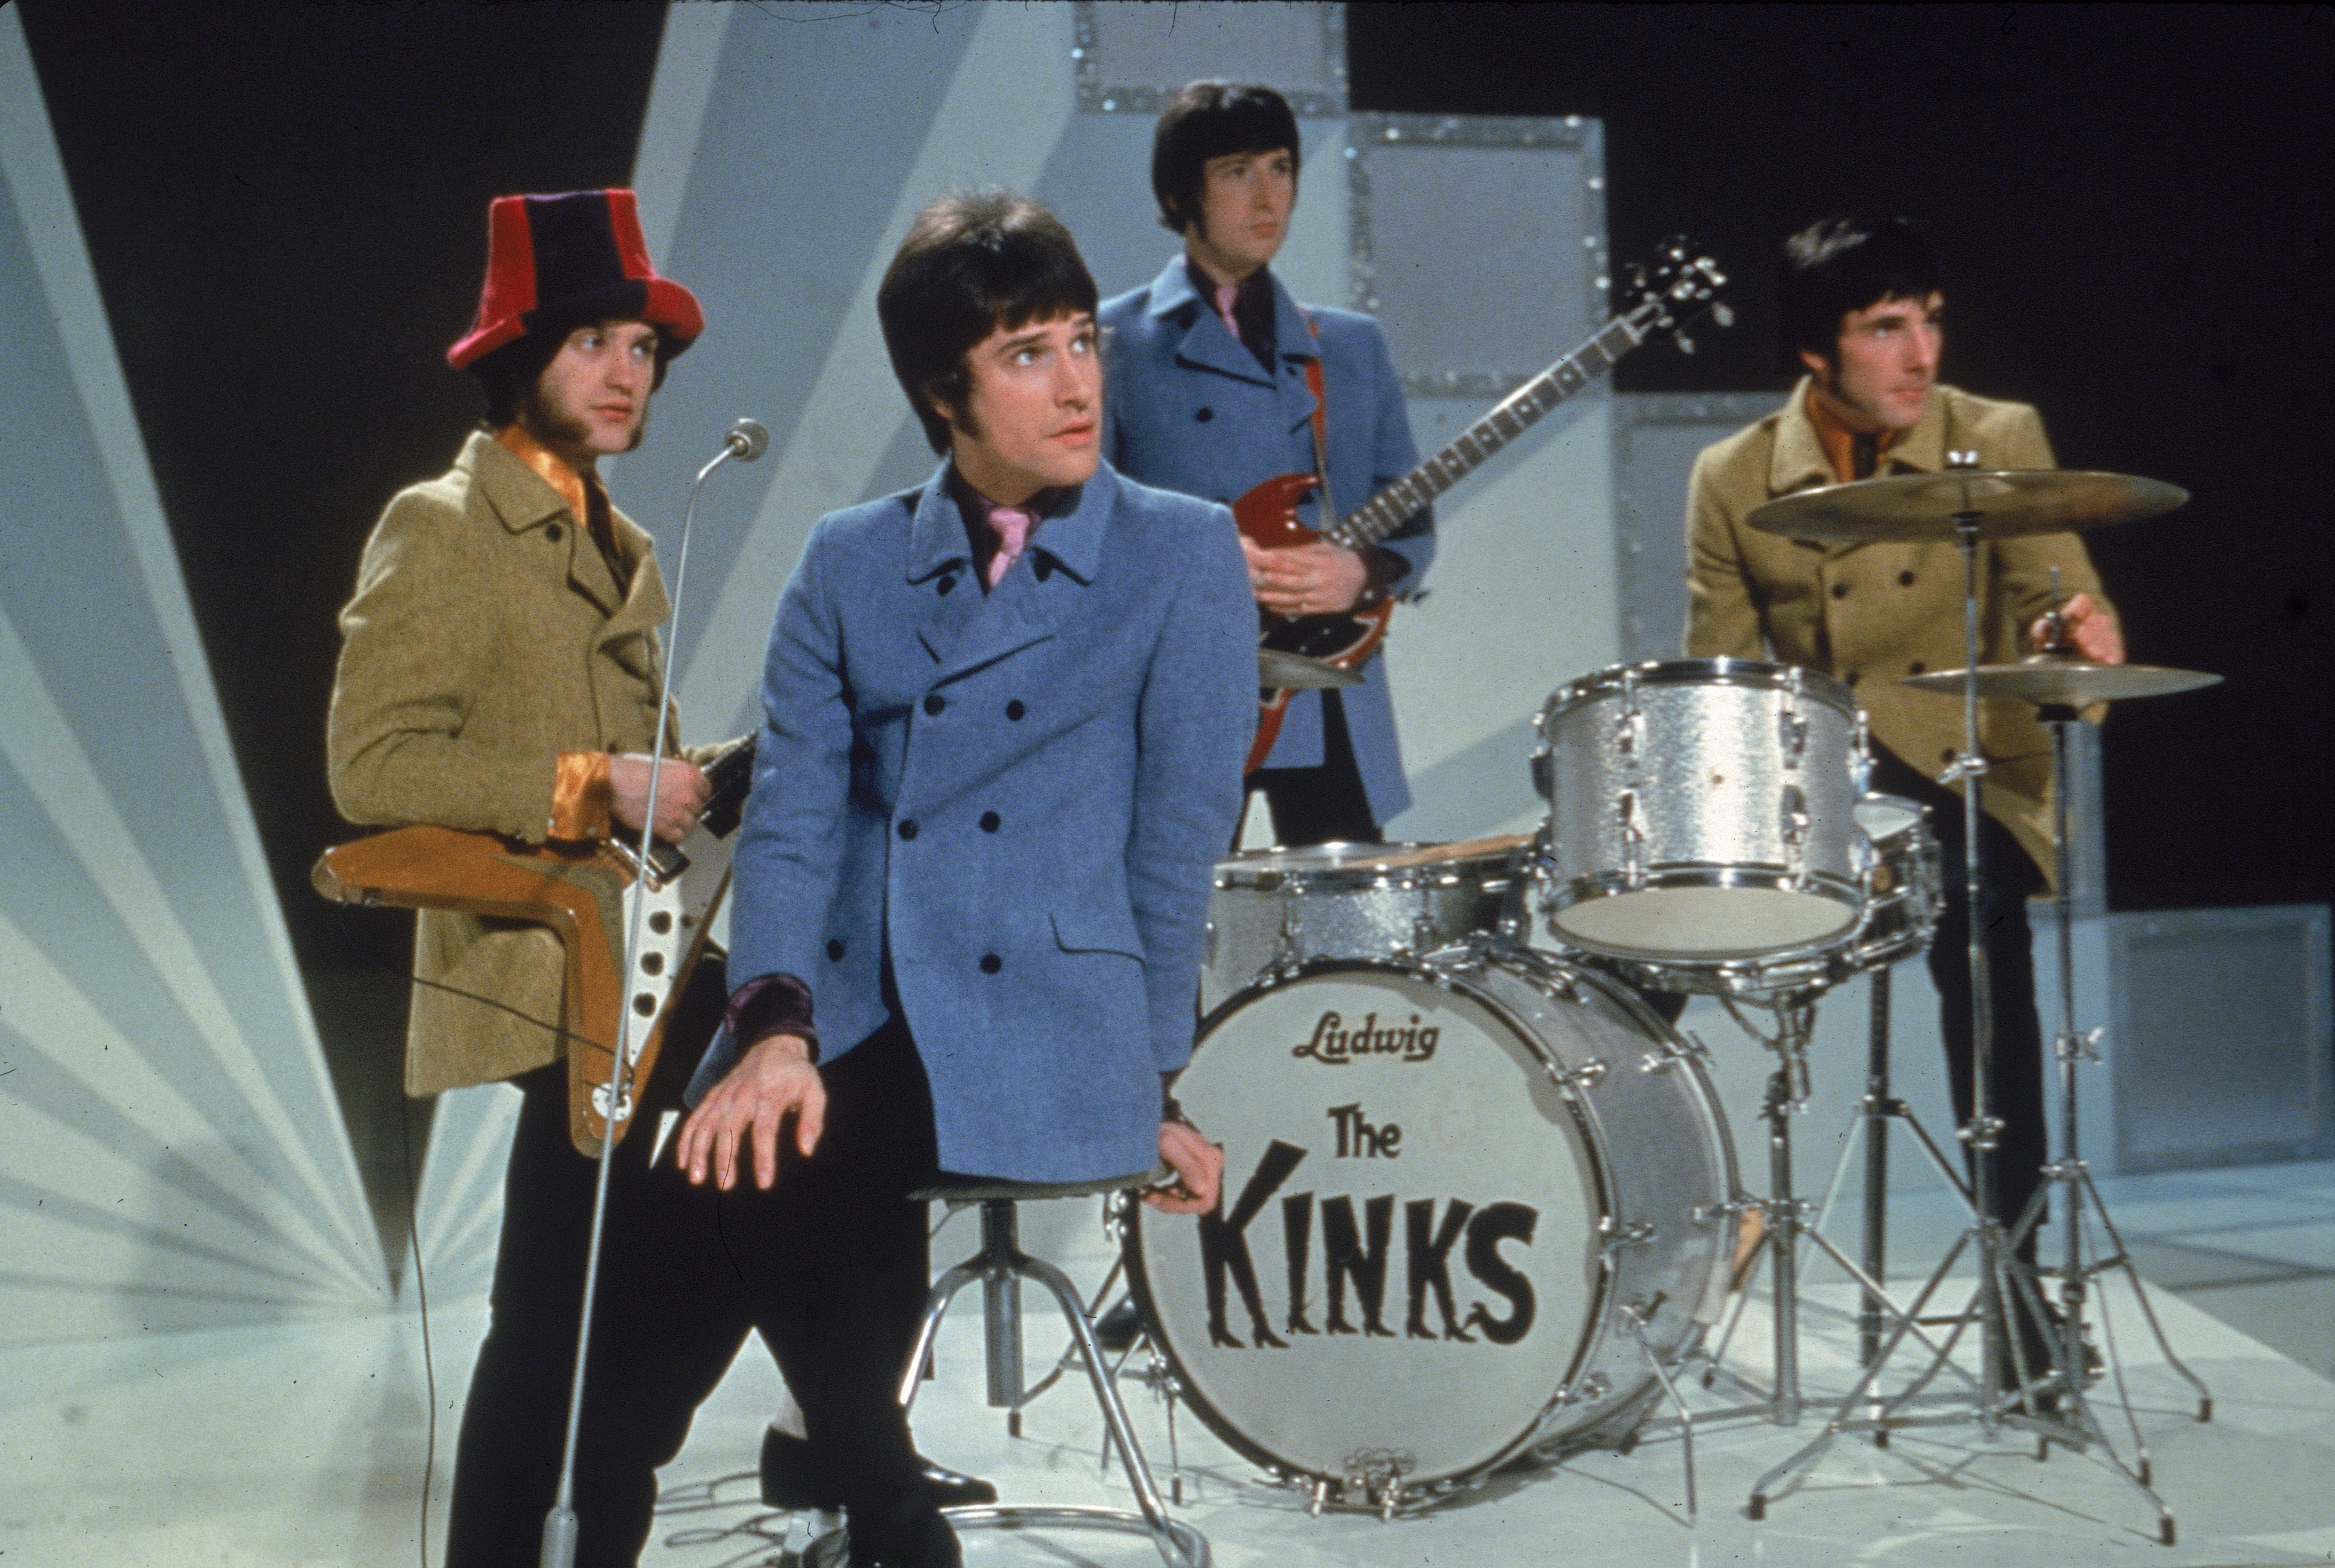 The Kinks, photographed in 1968